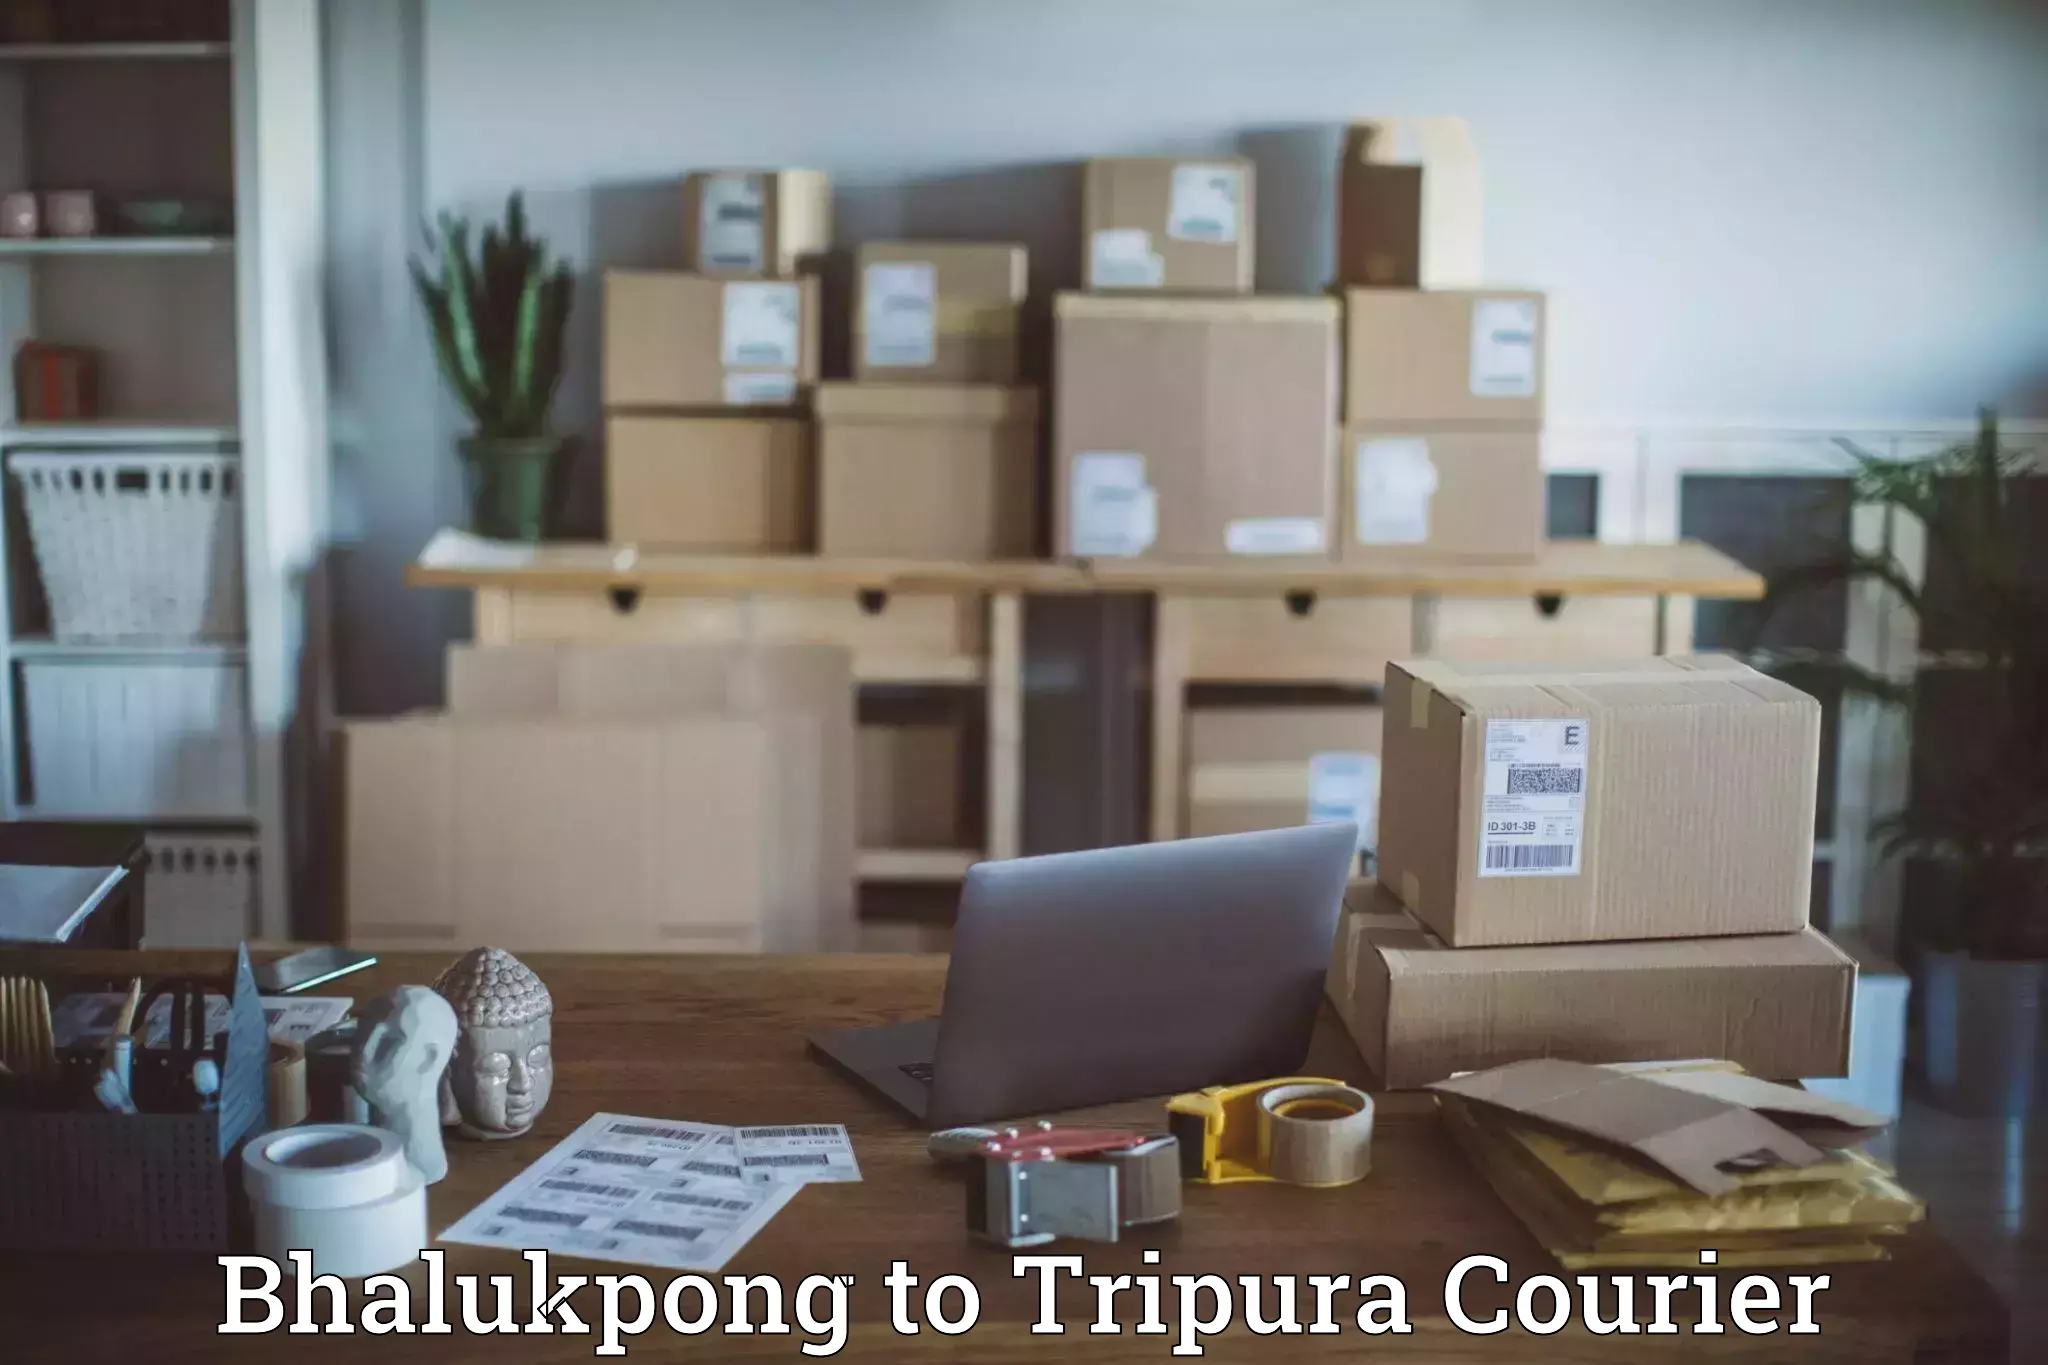 Express logistics service in Bhalukpong to Udaipur Tripura